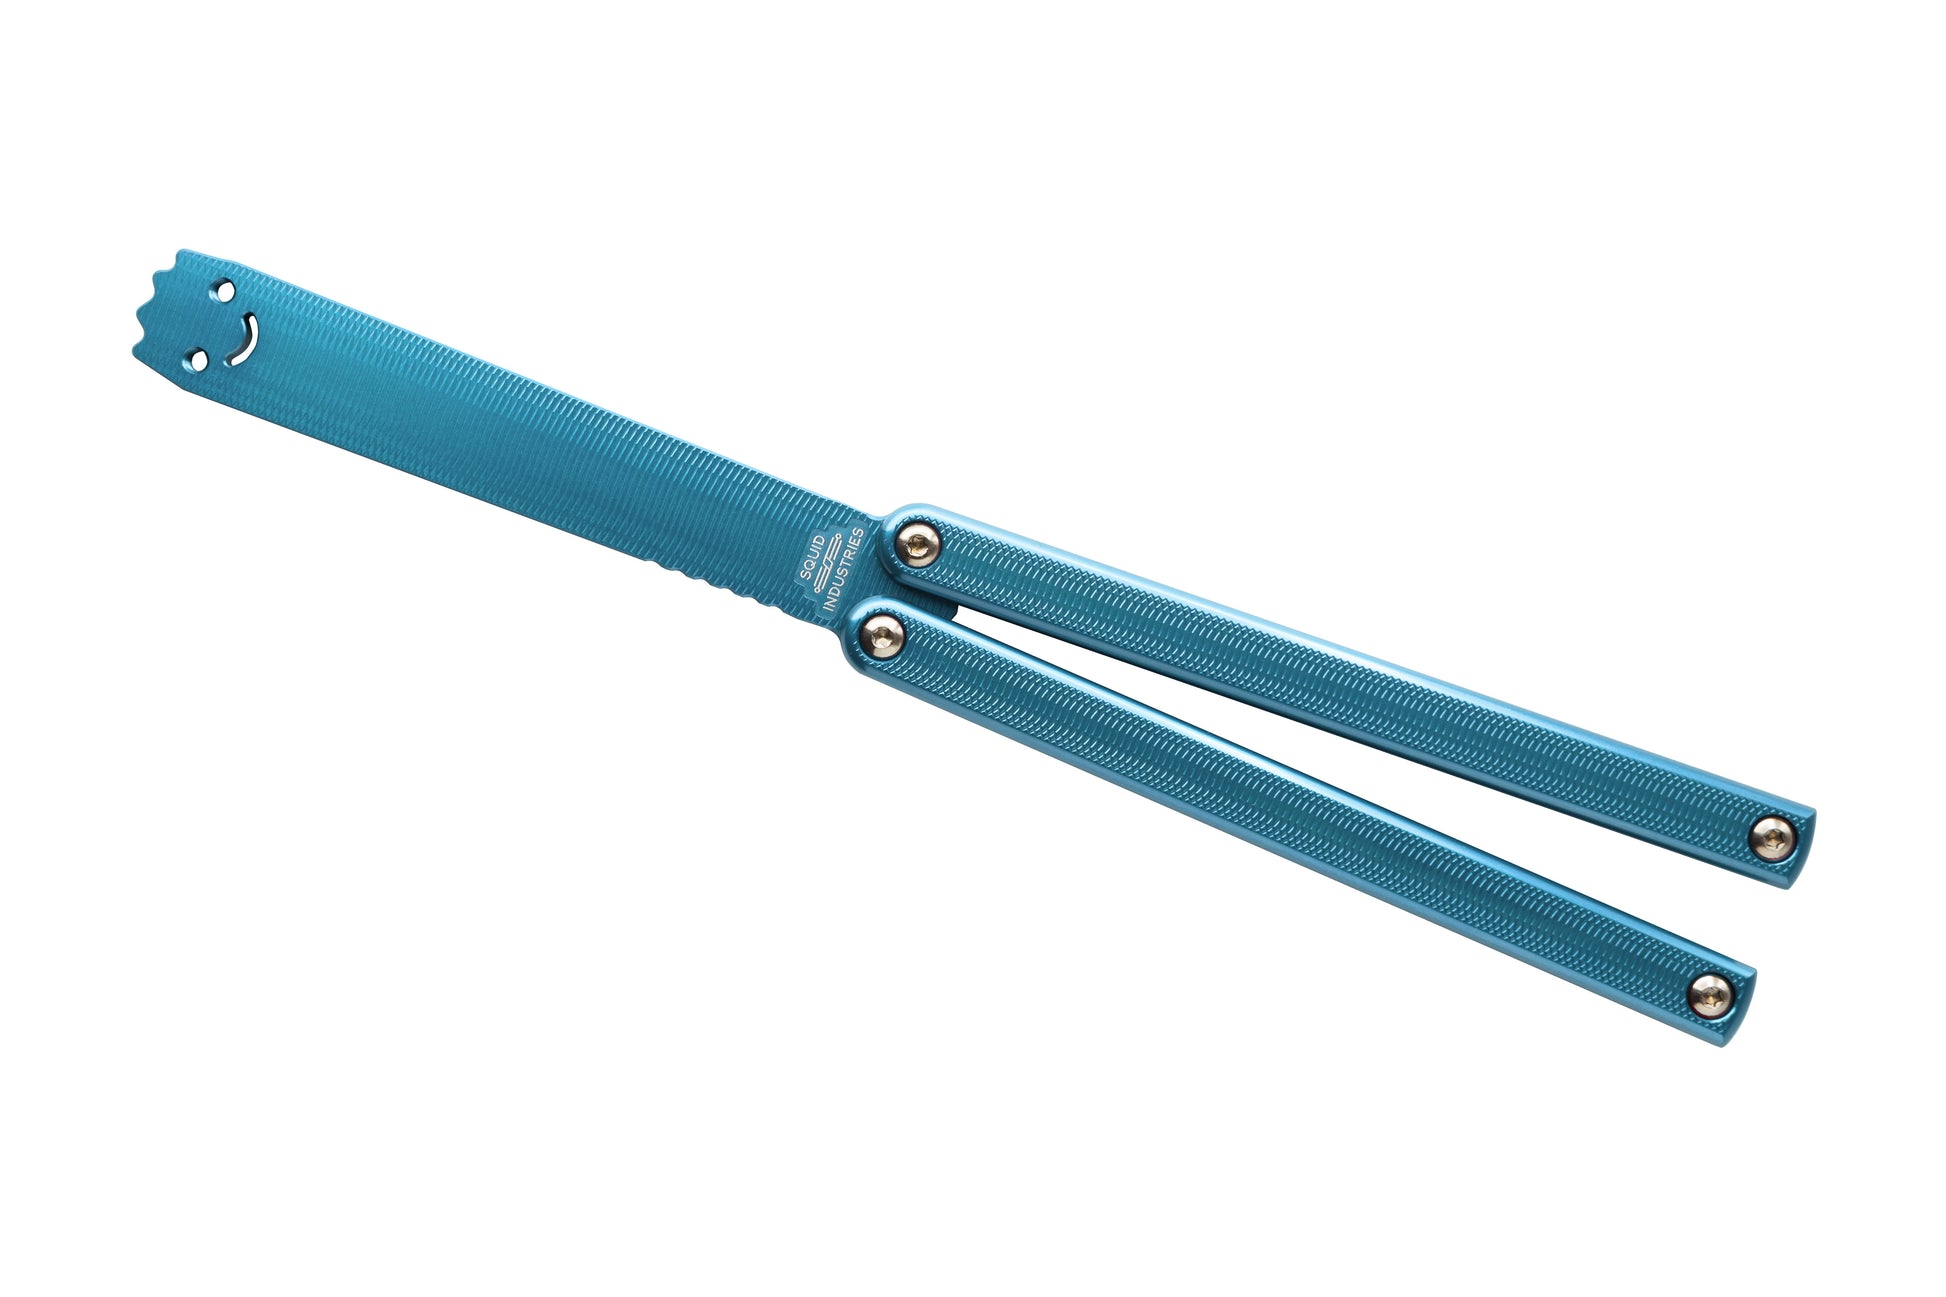 teal squiddy-al aluminum balisong butterfly knife trainer